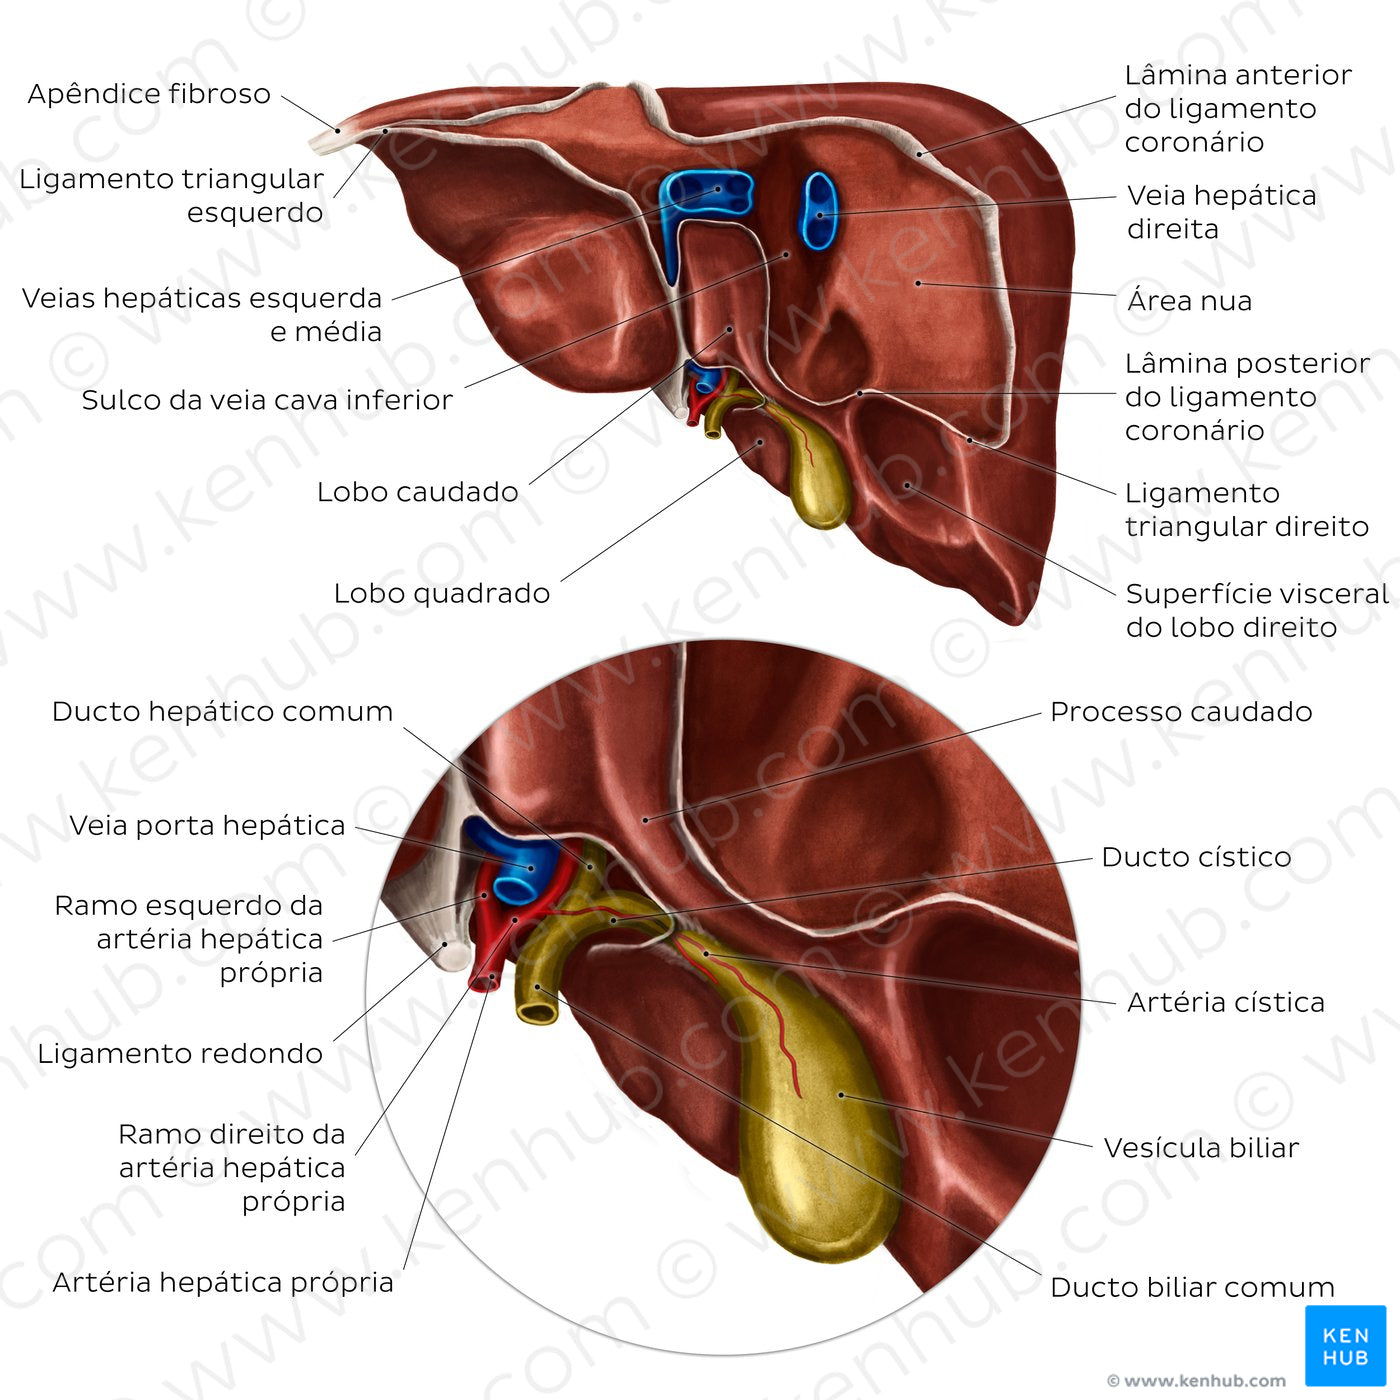 Posterior view of the liver (Portuguese)